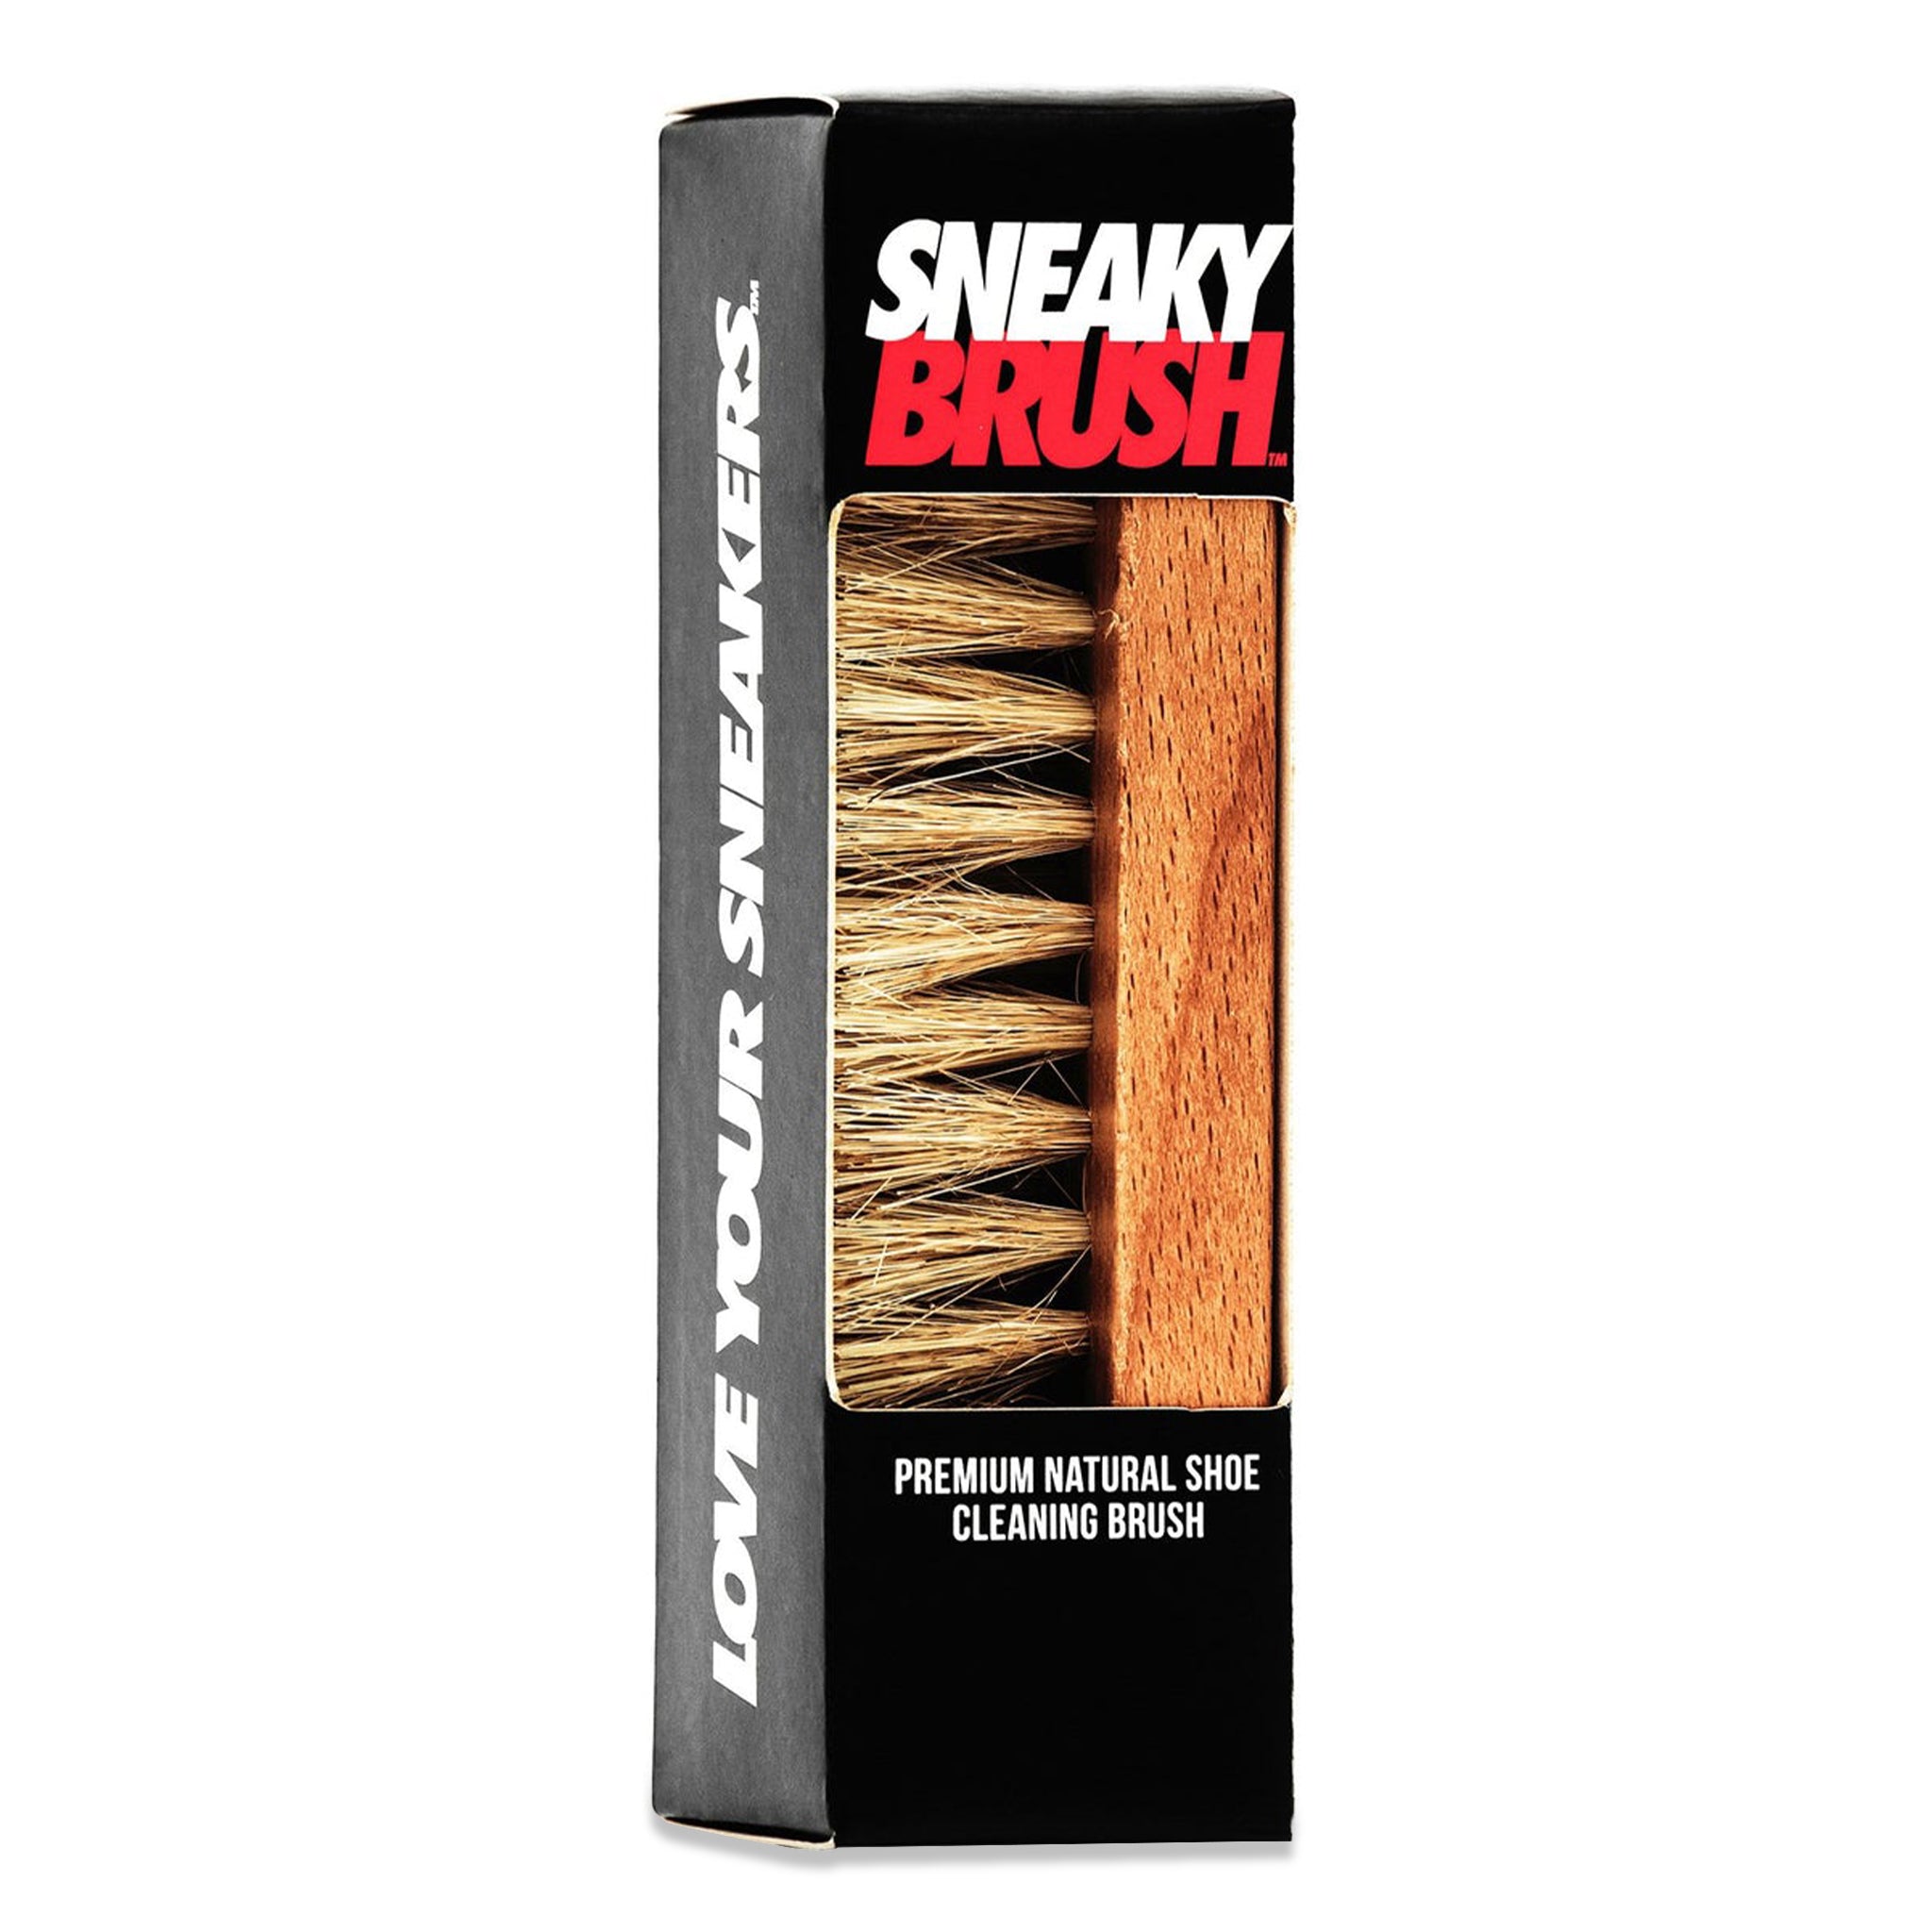 Image of Sneaky Brush - Premium Sneaker and Shoe Cleaning Brush